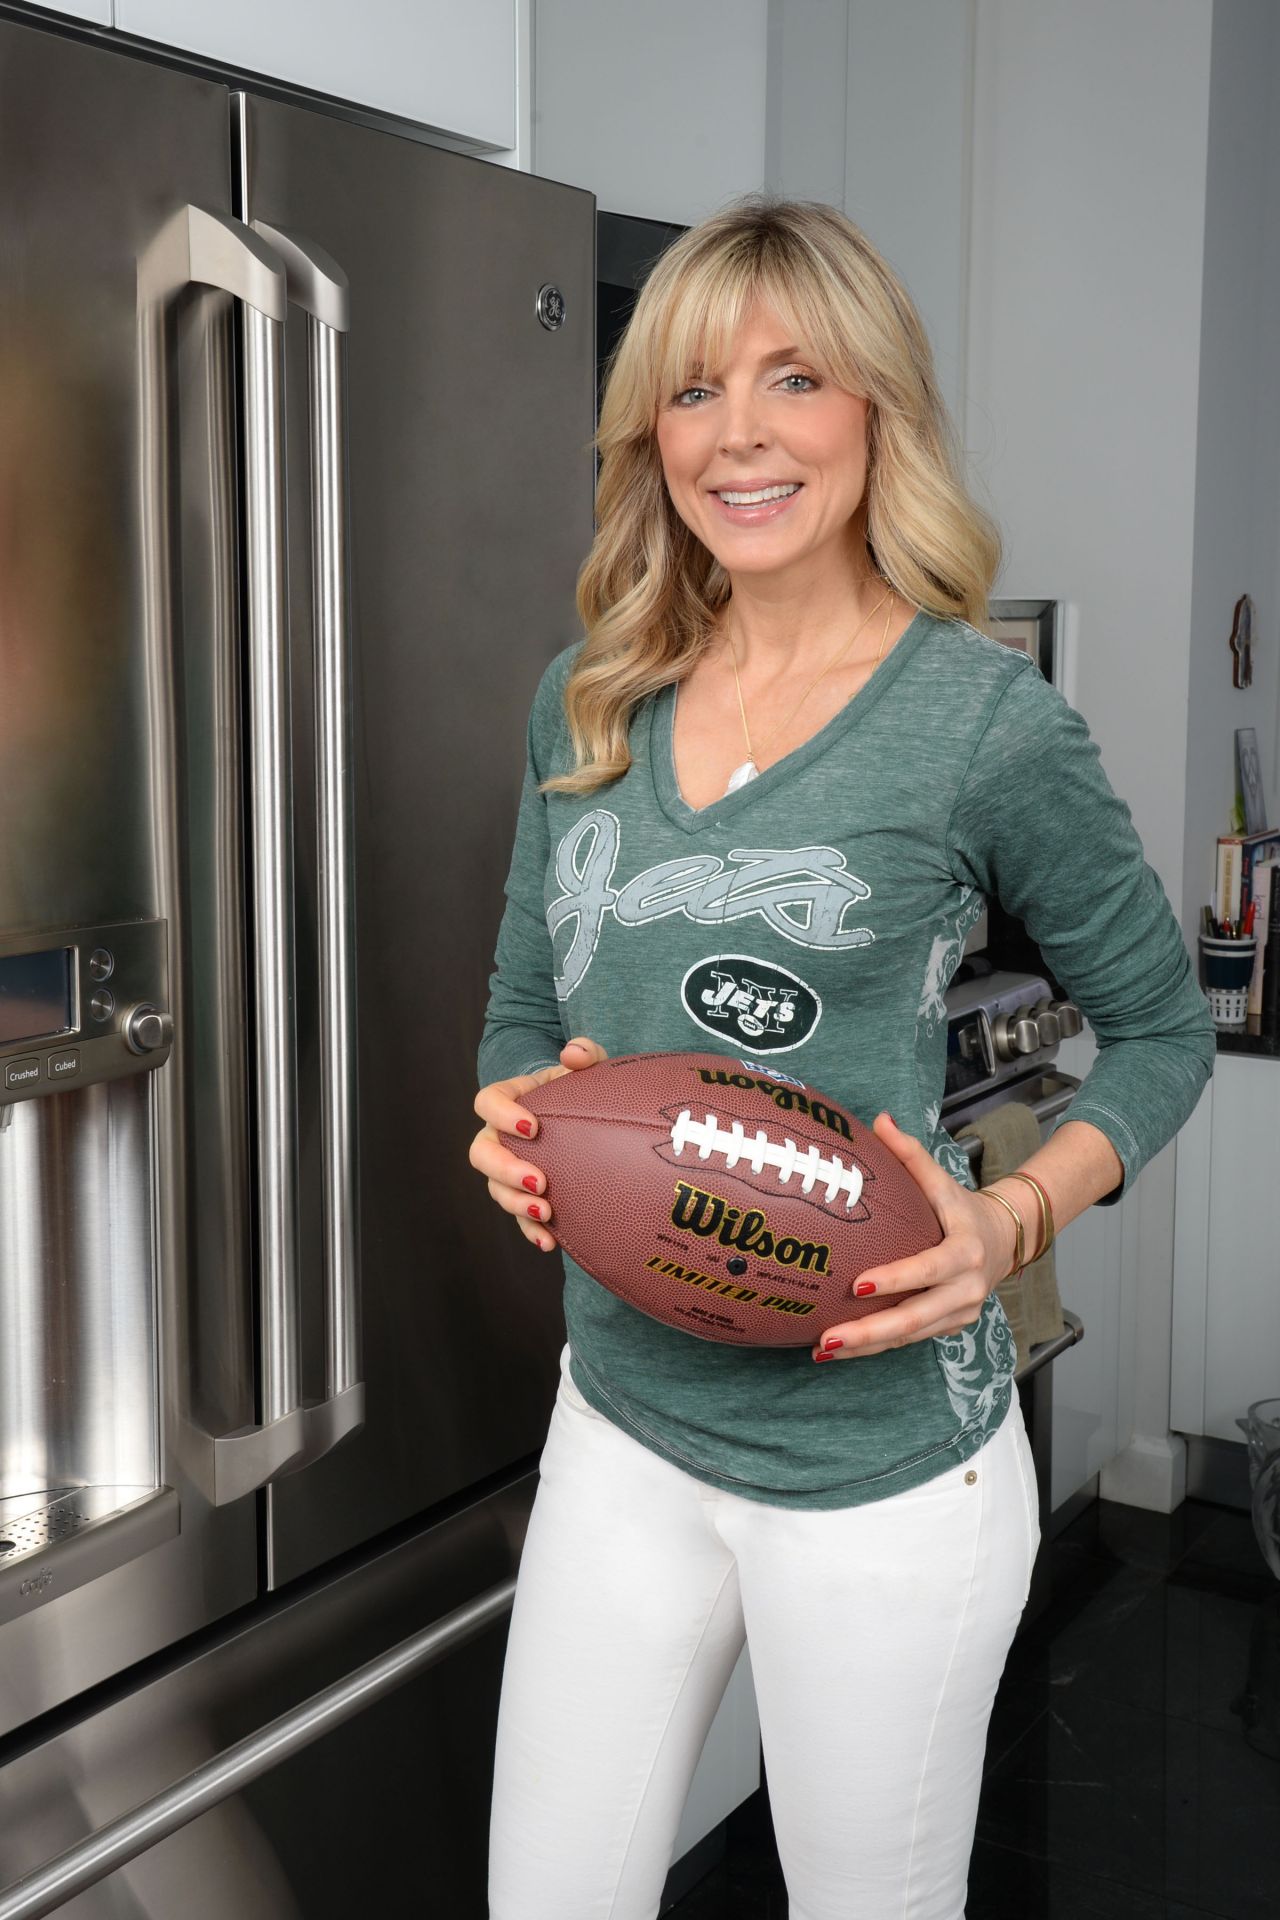 Marla Maples Getting Ready on Super Bowl Sunday1280 x 1920